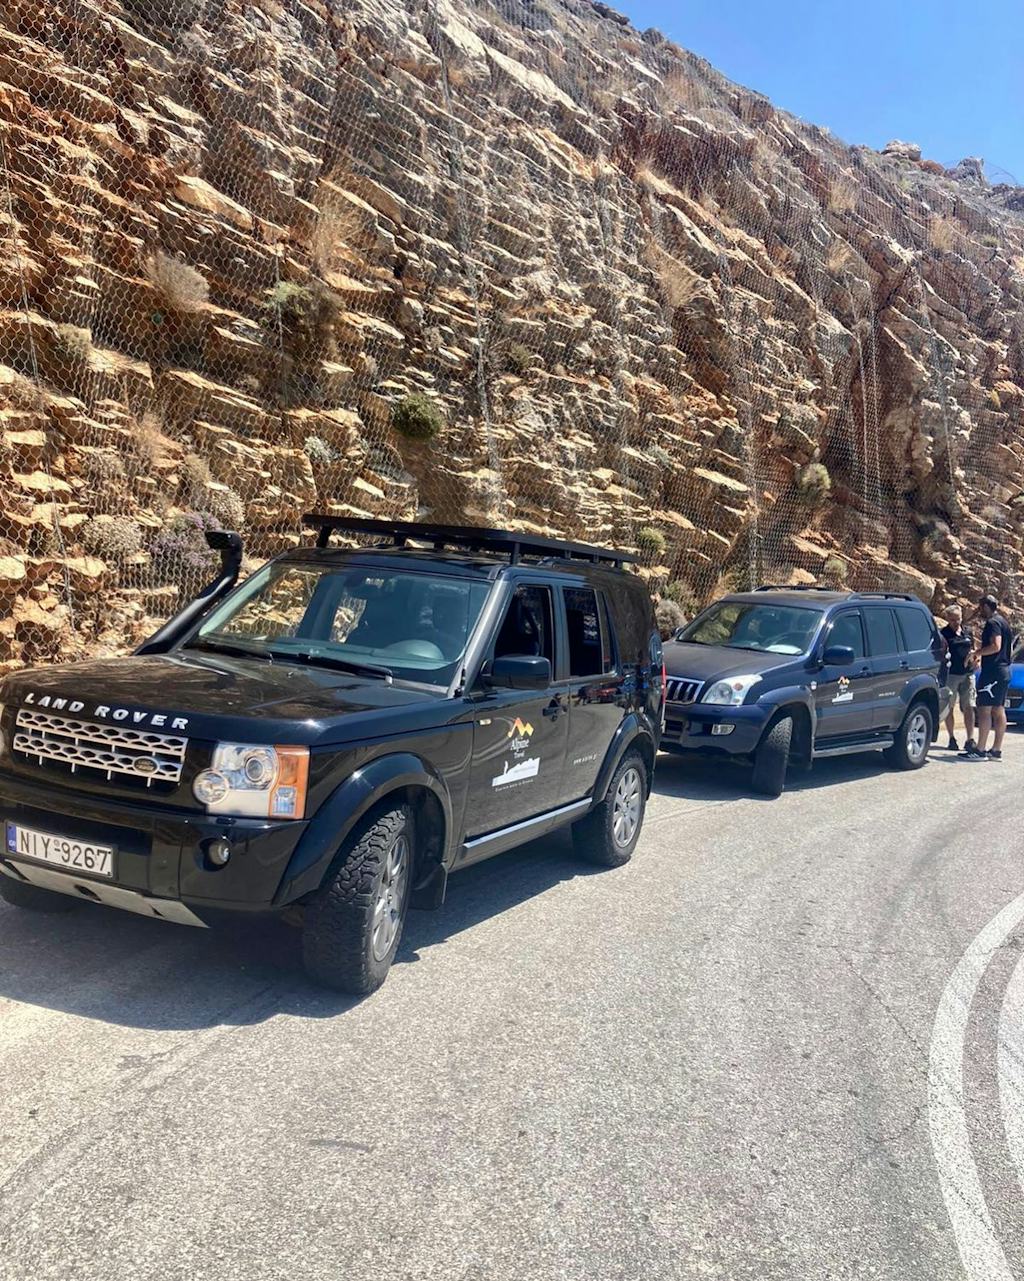 Guided Car Rental Experience: Explore Crete with a Driver-Guide